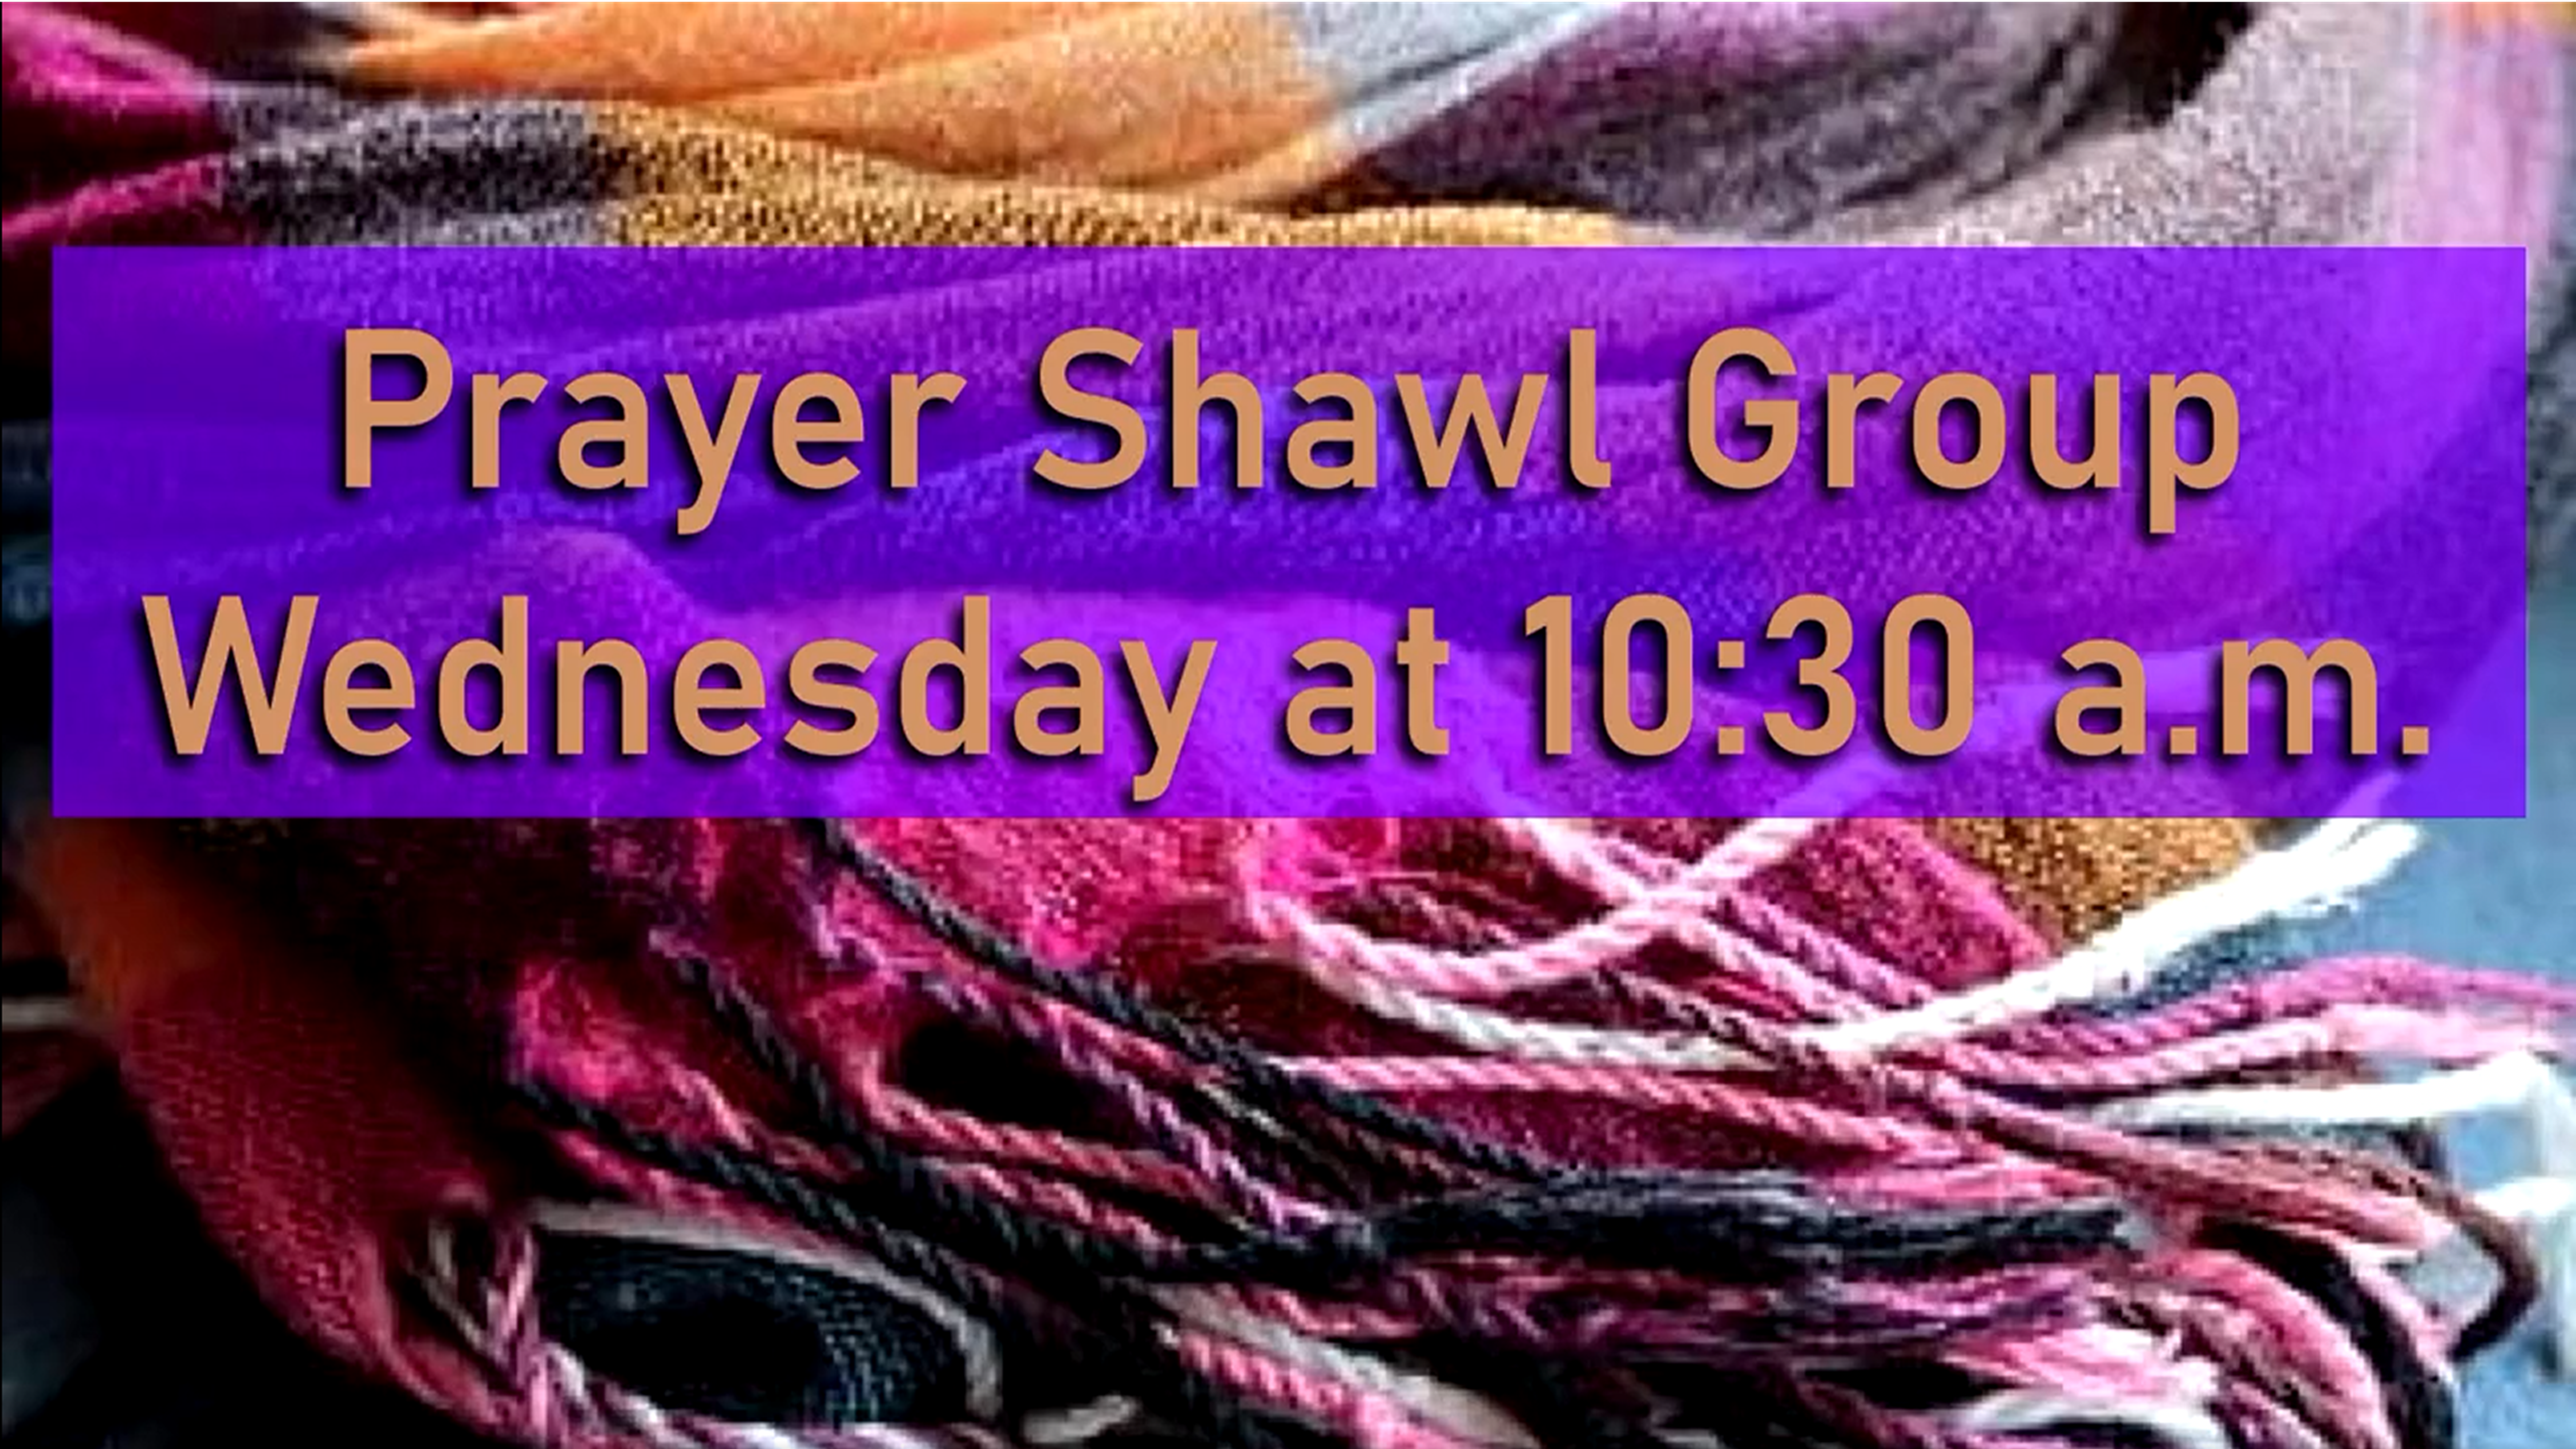 Prayer Shawl Group, Wednesdays at 10:30 am in the Wesley Room. All knitters are welcome!